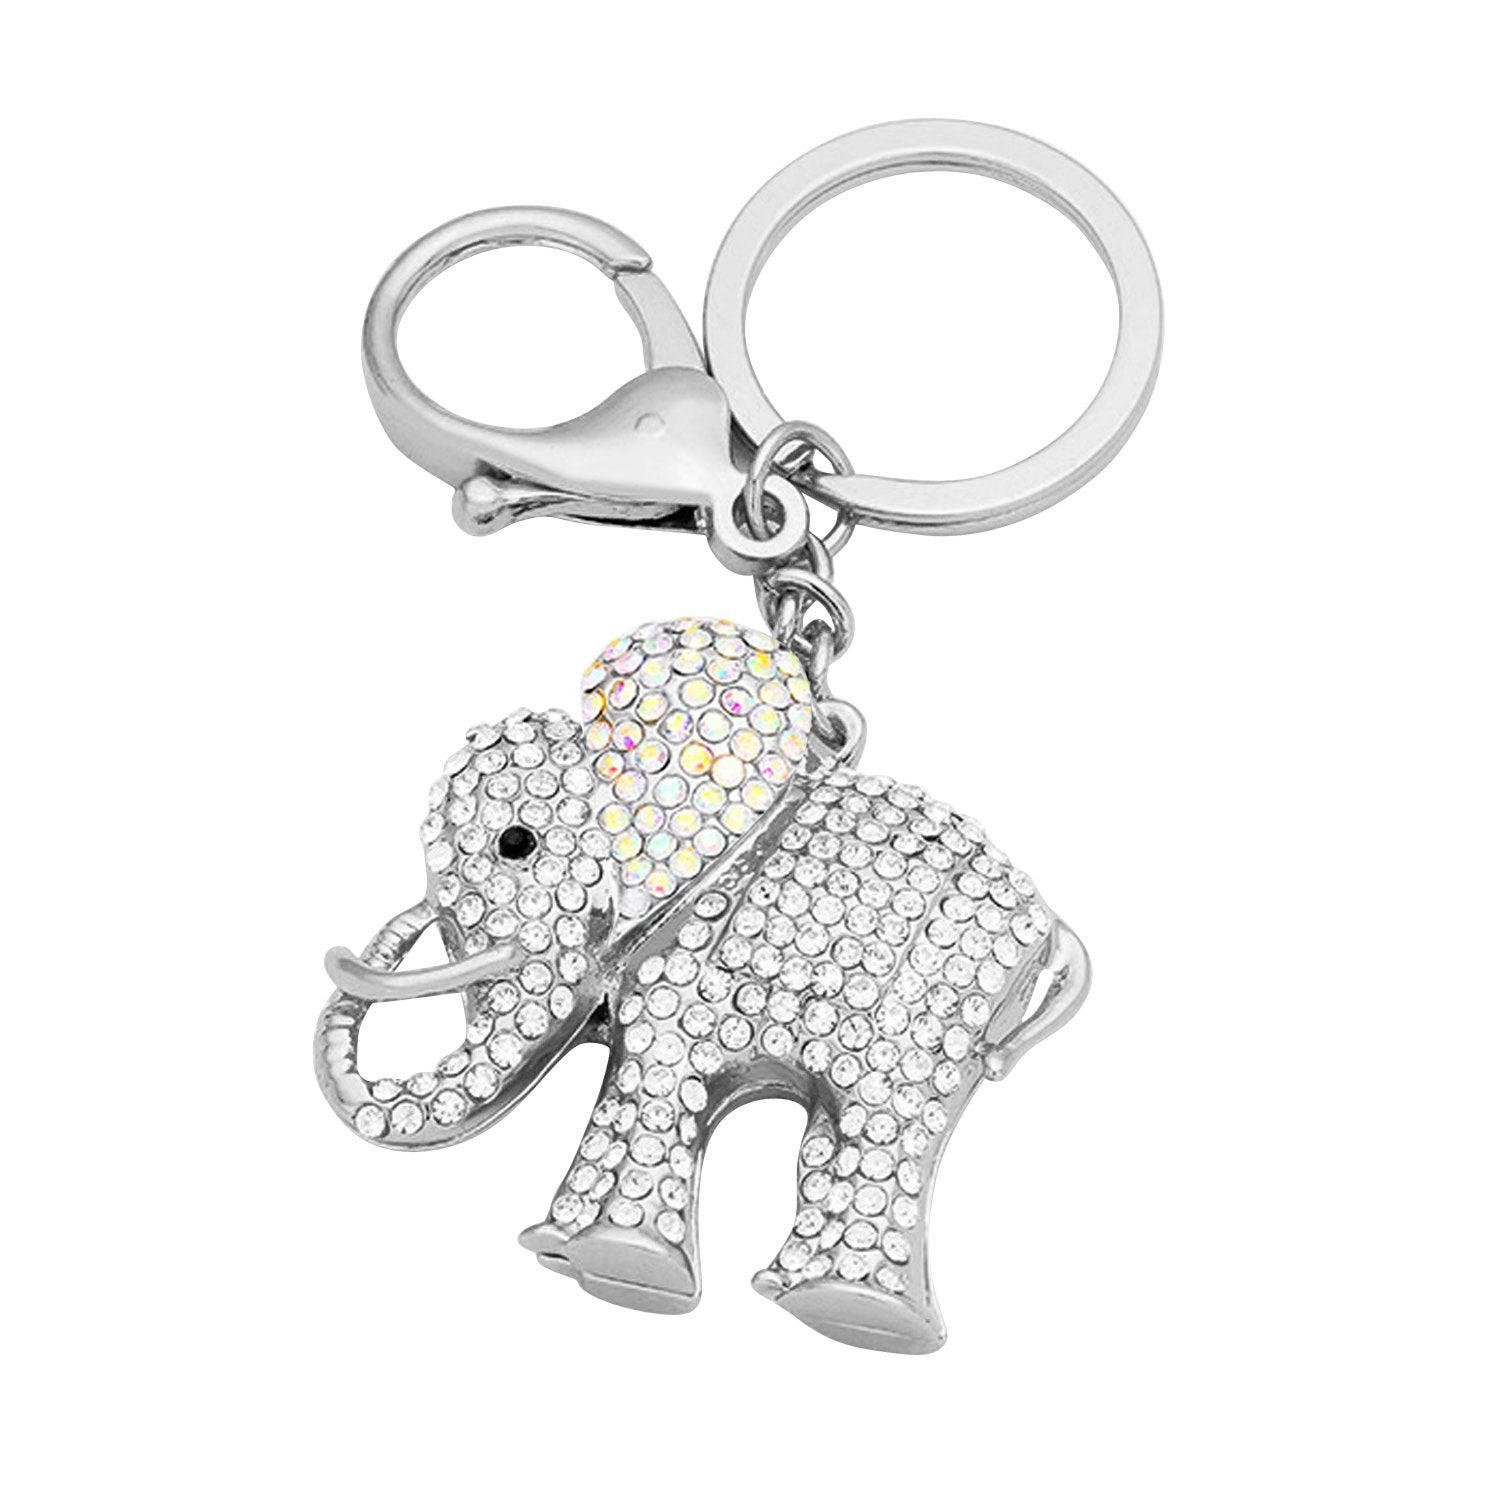 2 of 2: Sparkling Pave Crystal Elephant Key Chain (Silver Tone) by Elephant Boutique